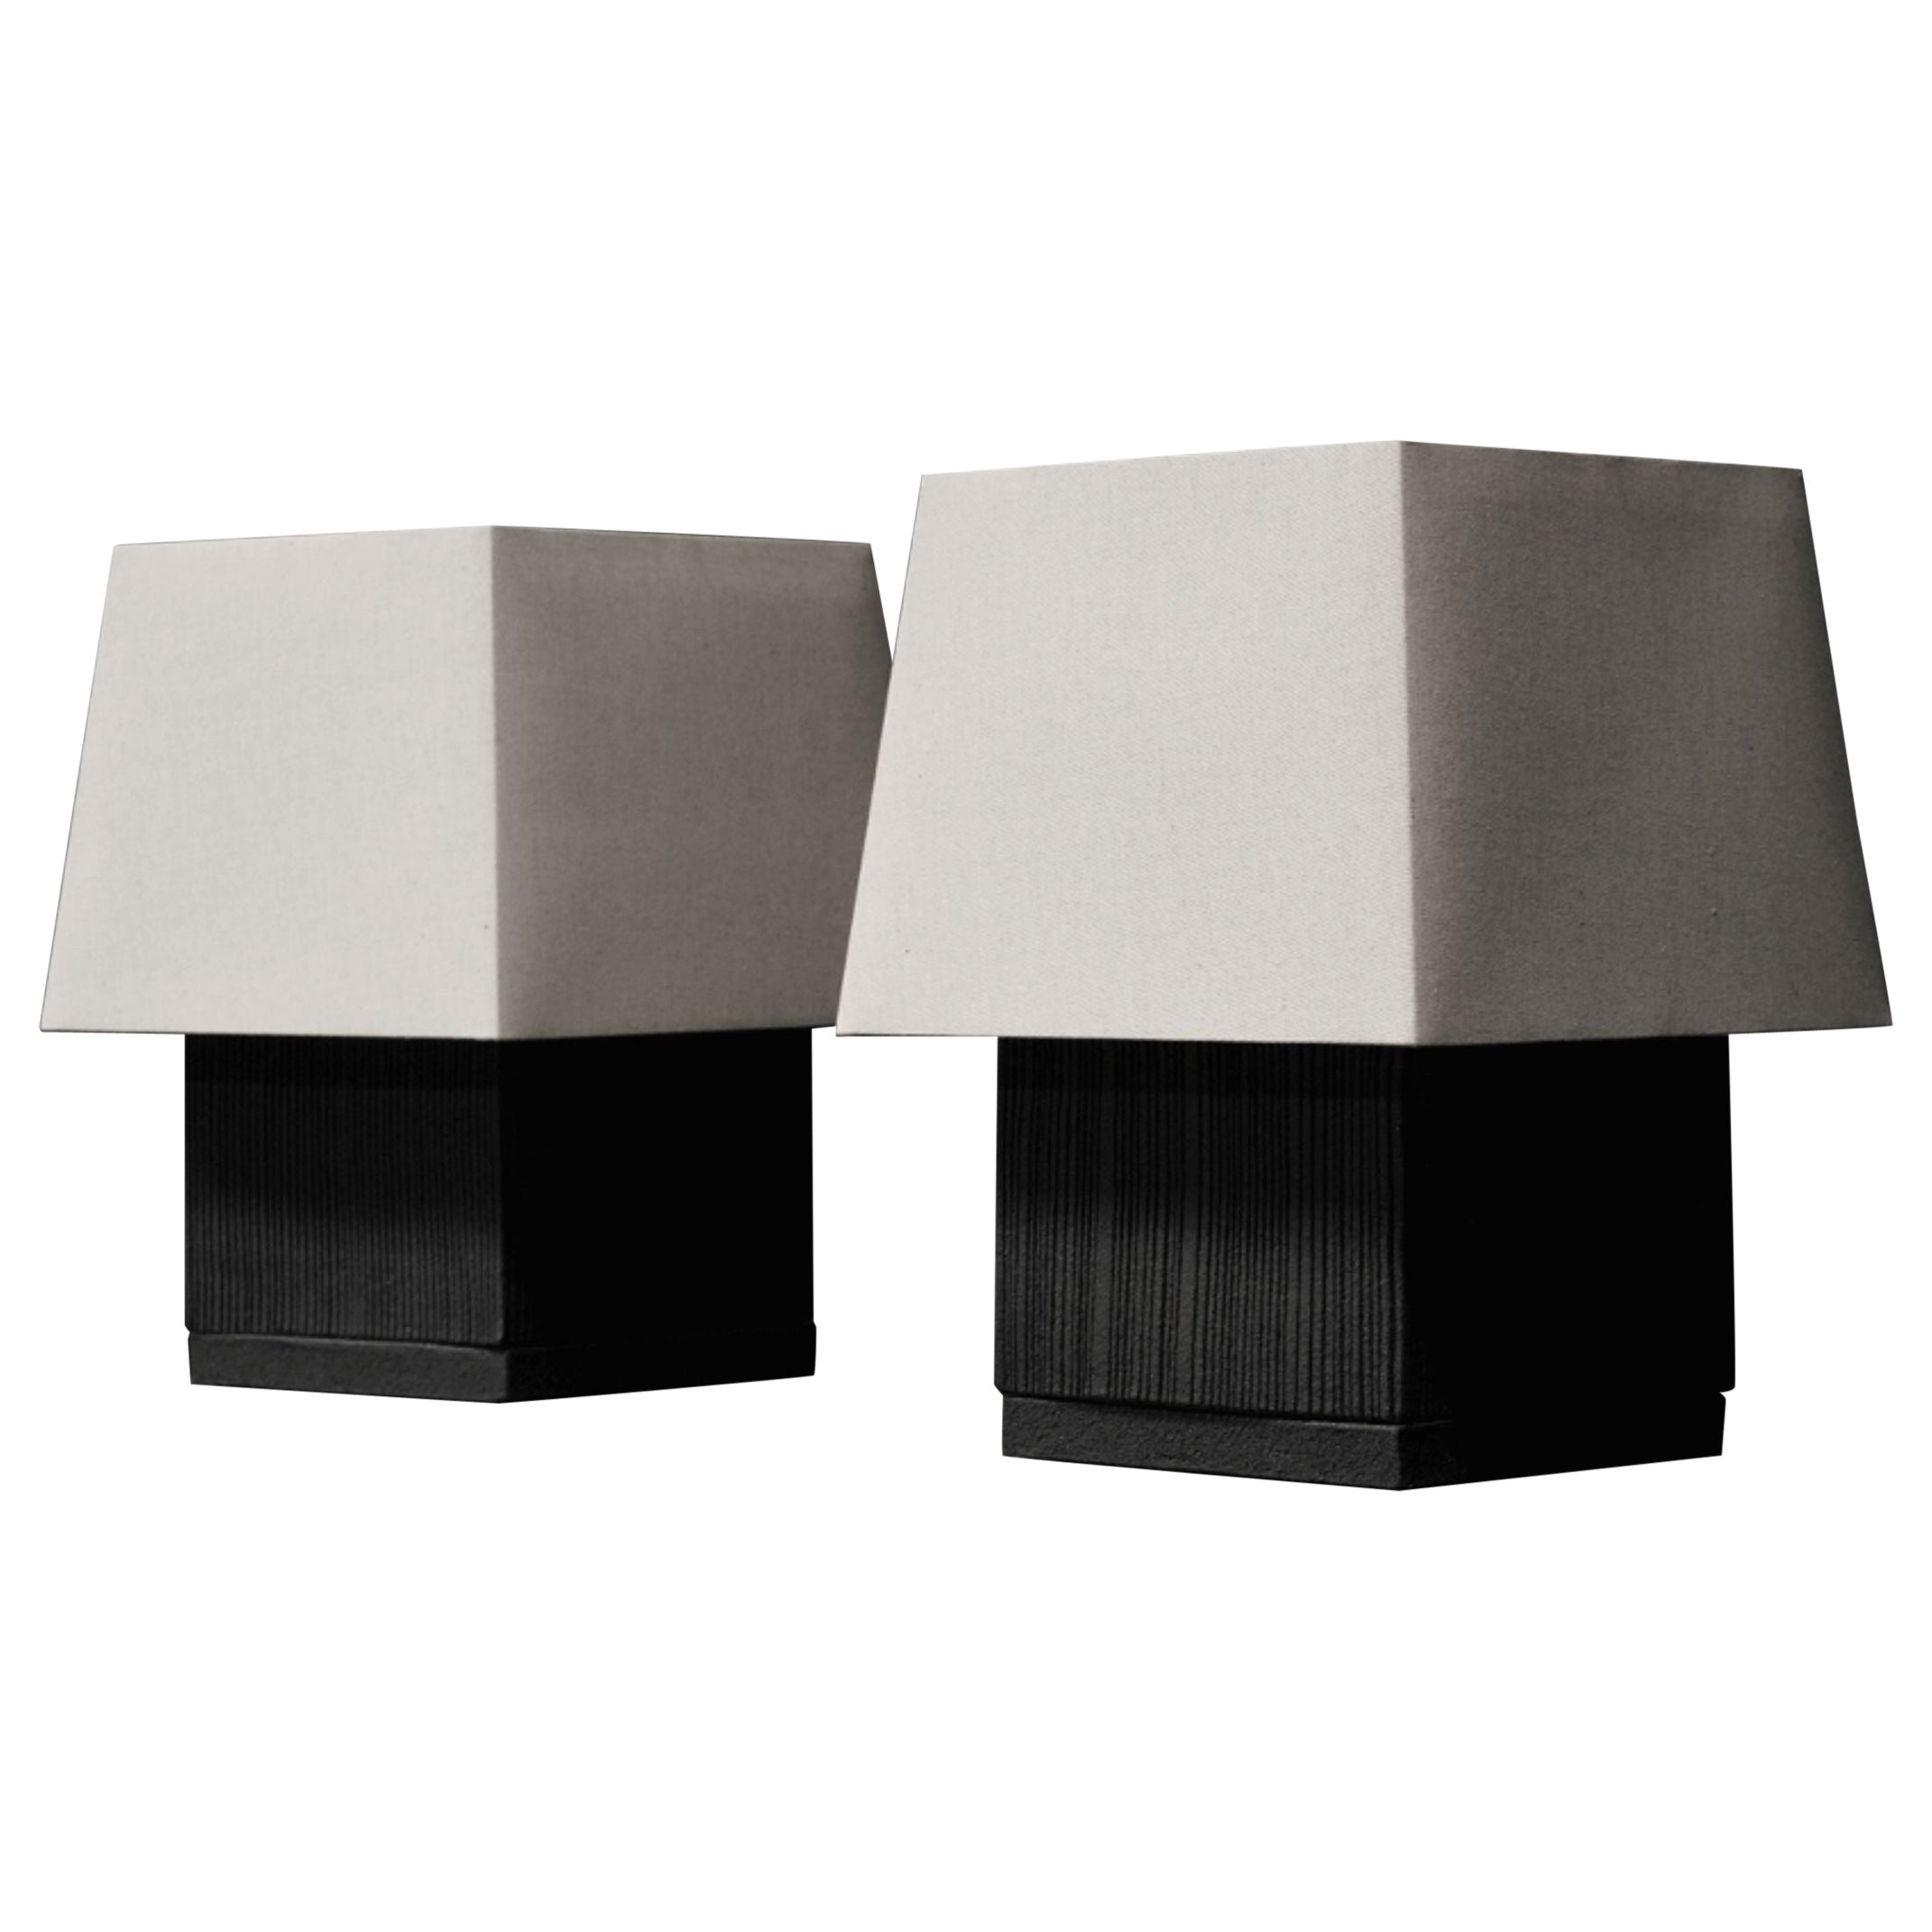 Raw Square Ceramic Table Lamp For Sale